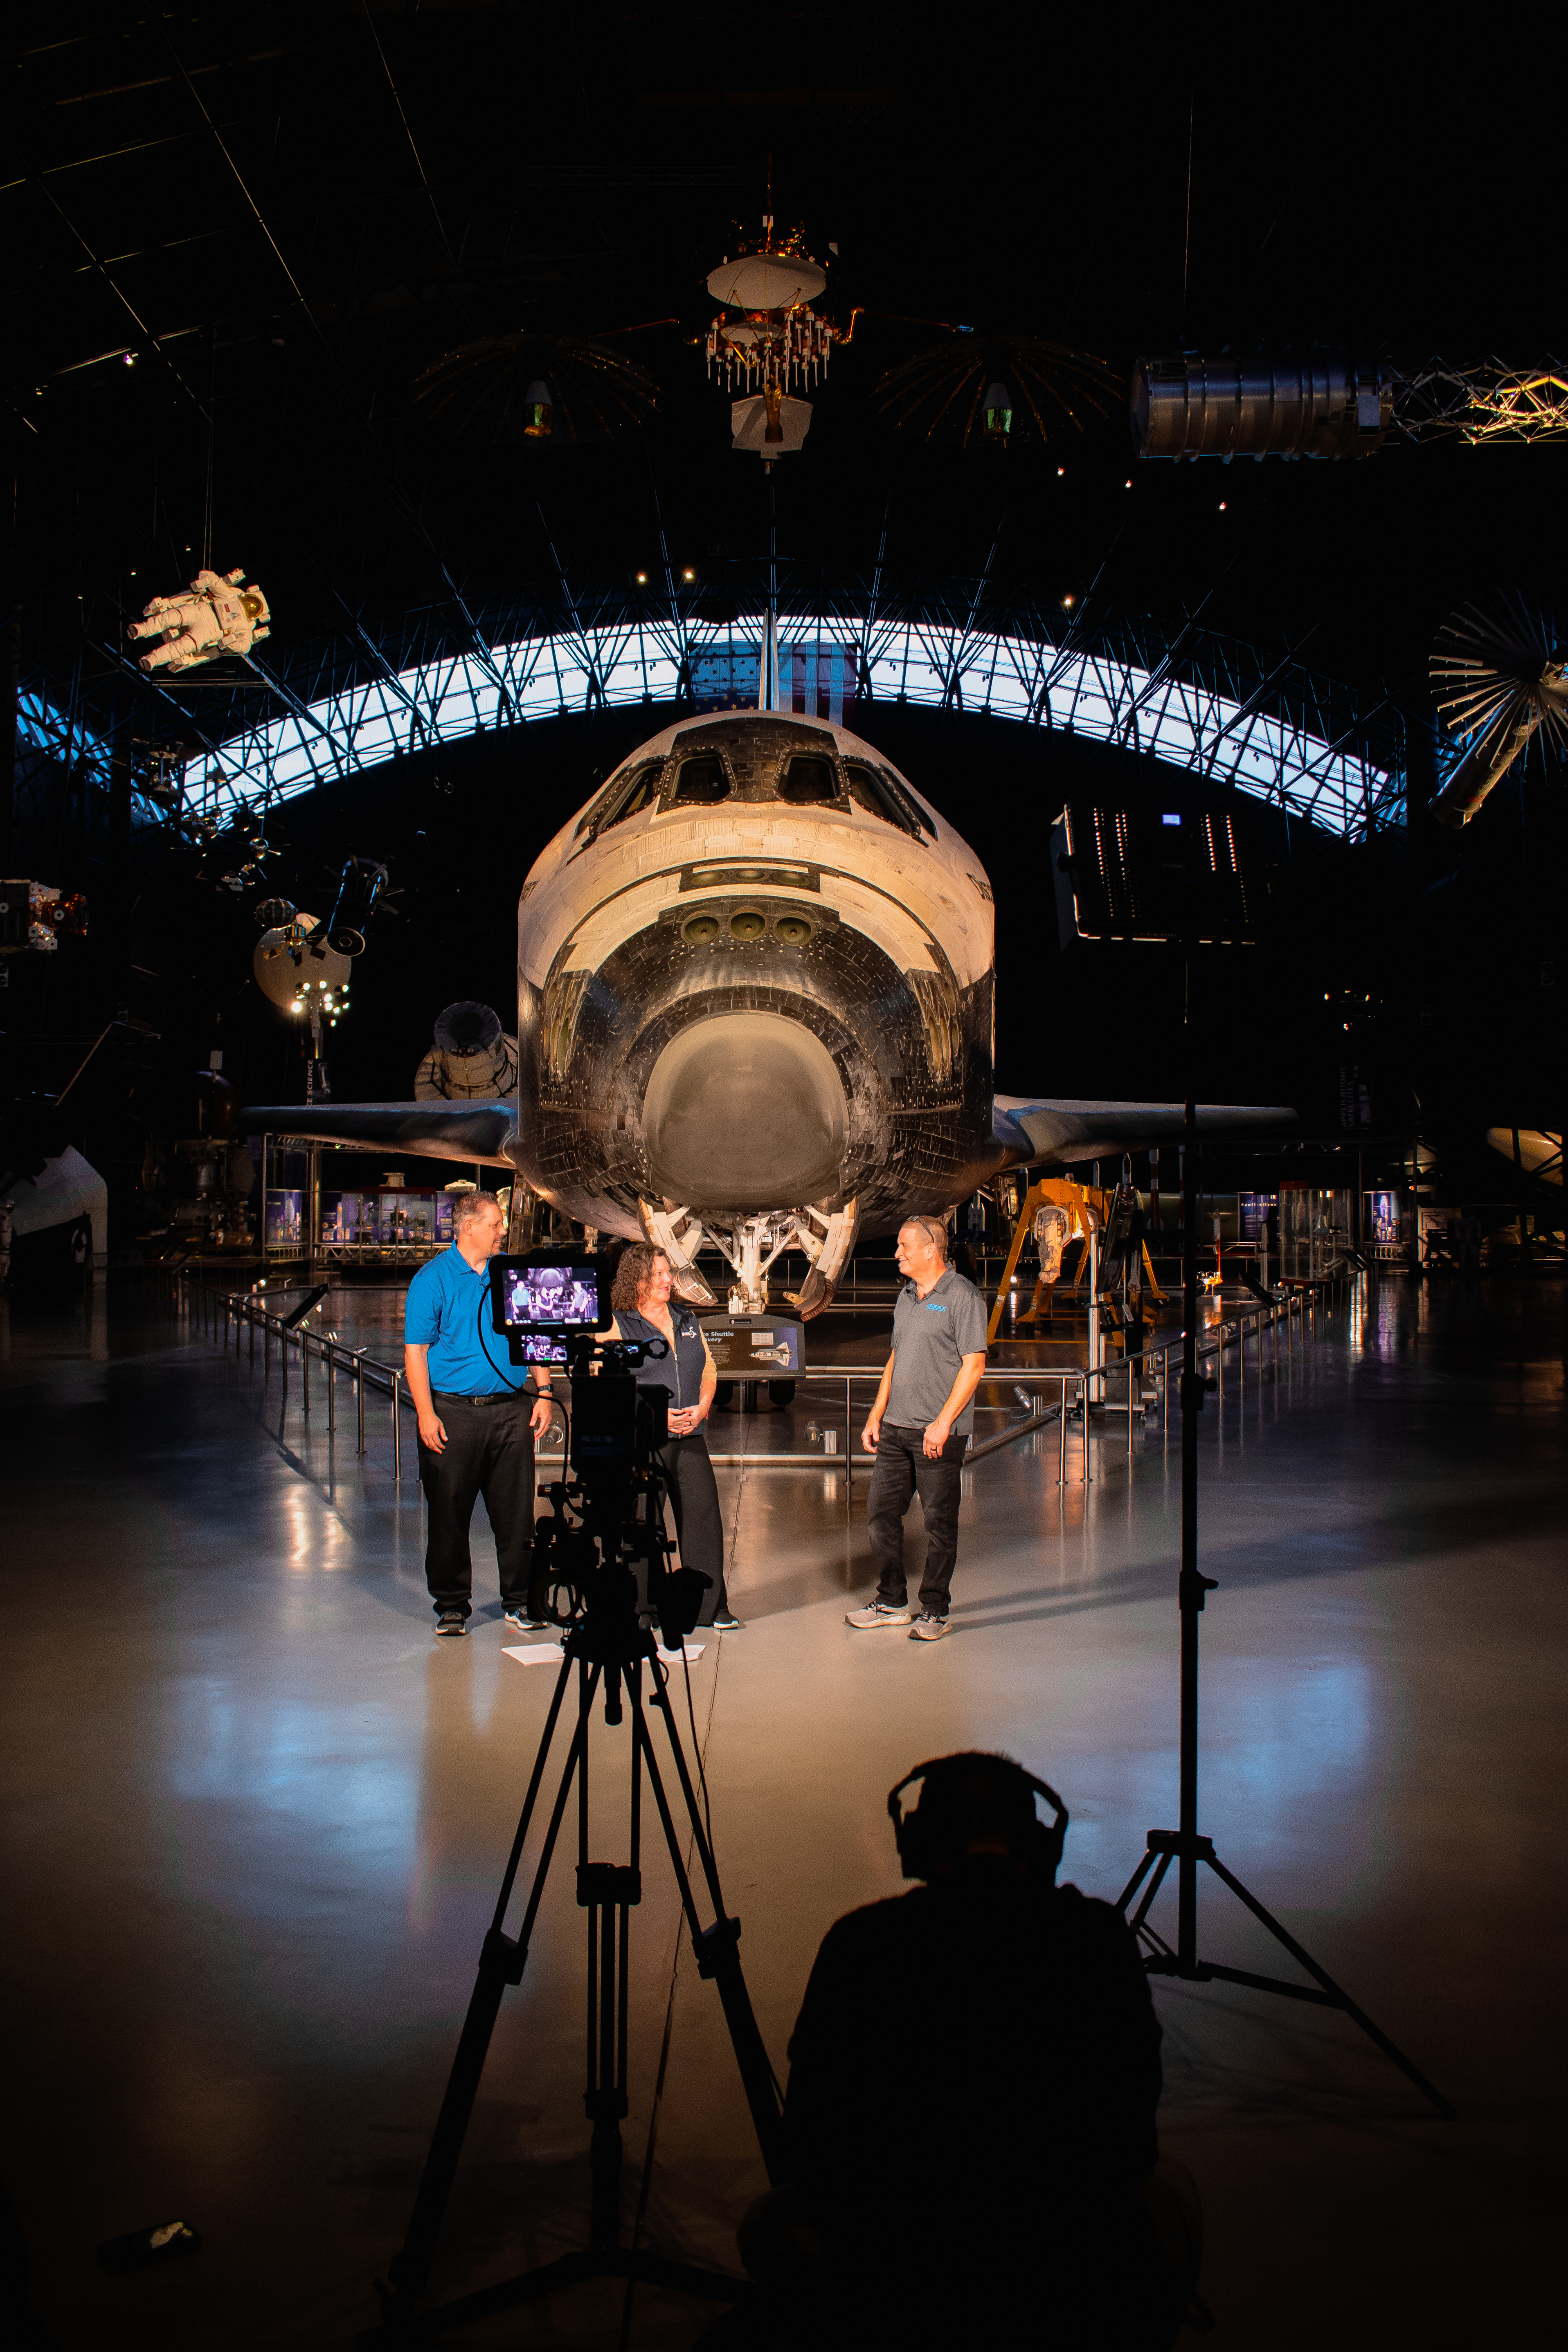 Taping in front of Space Shuttle.